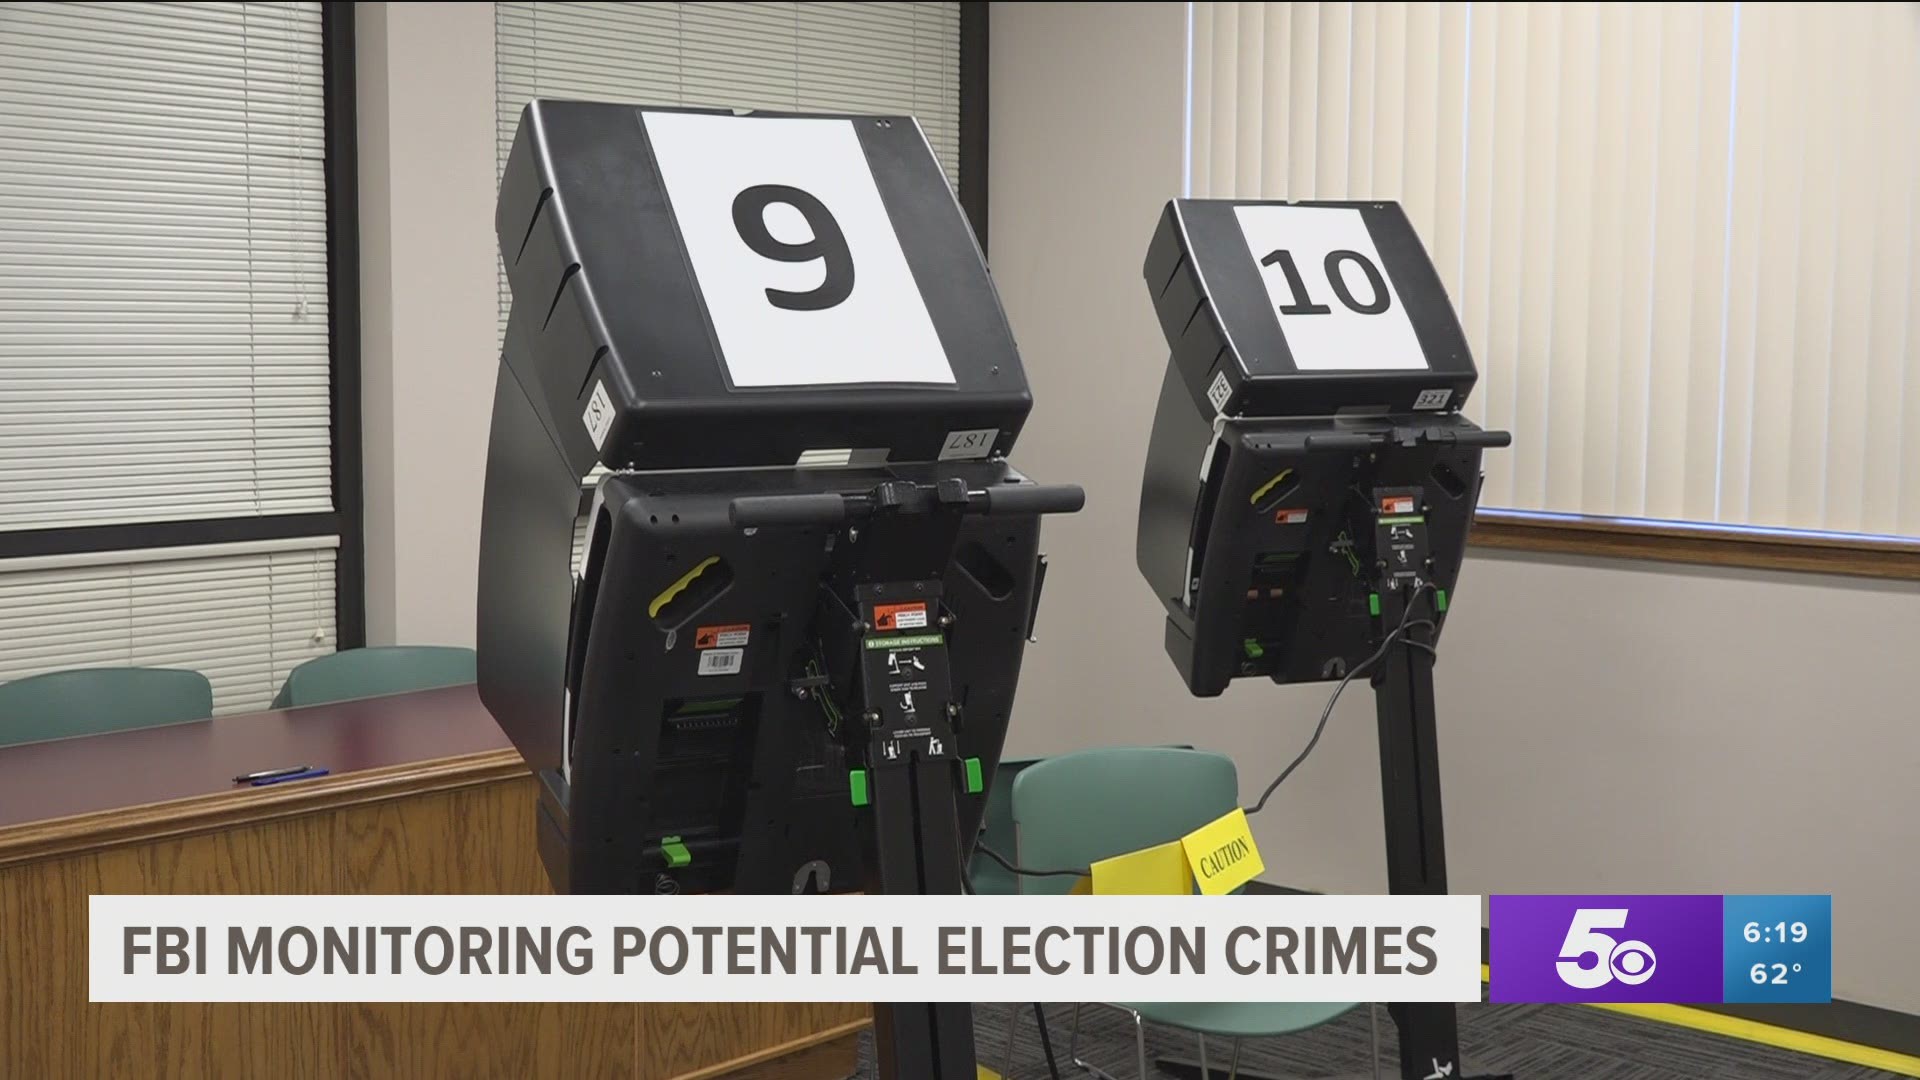 The FBI office in Little Rock along with the Department of Justice will be investigating all suspected cases of voter fraud and election-related crimes.